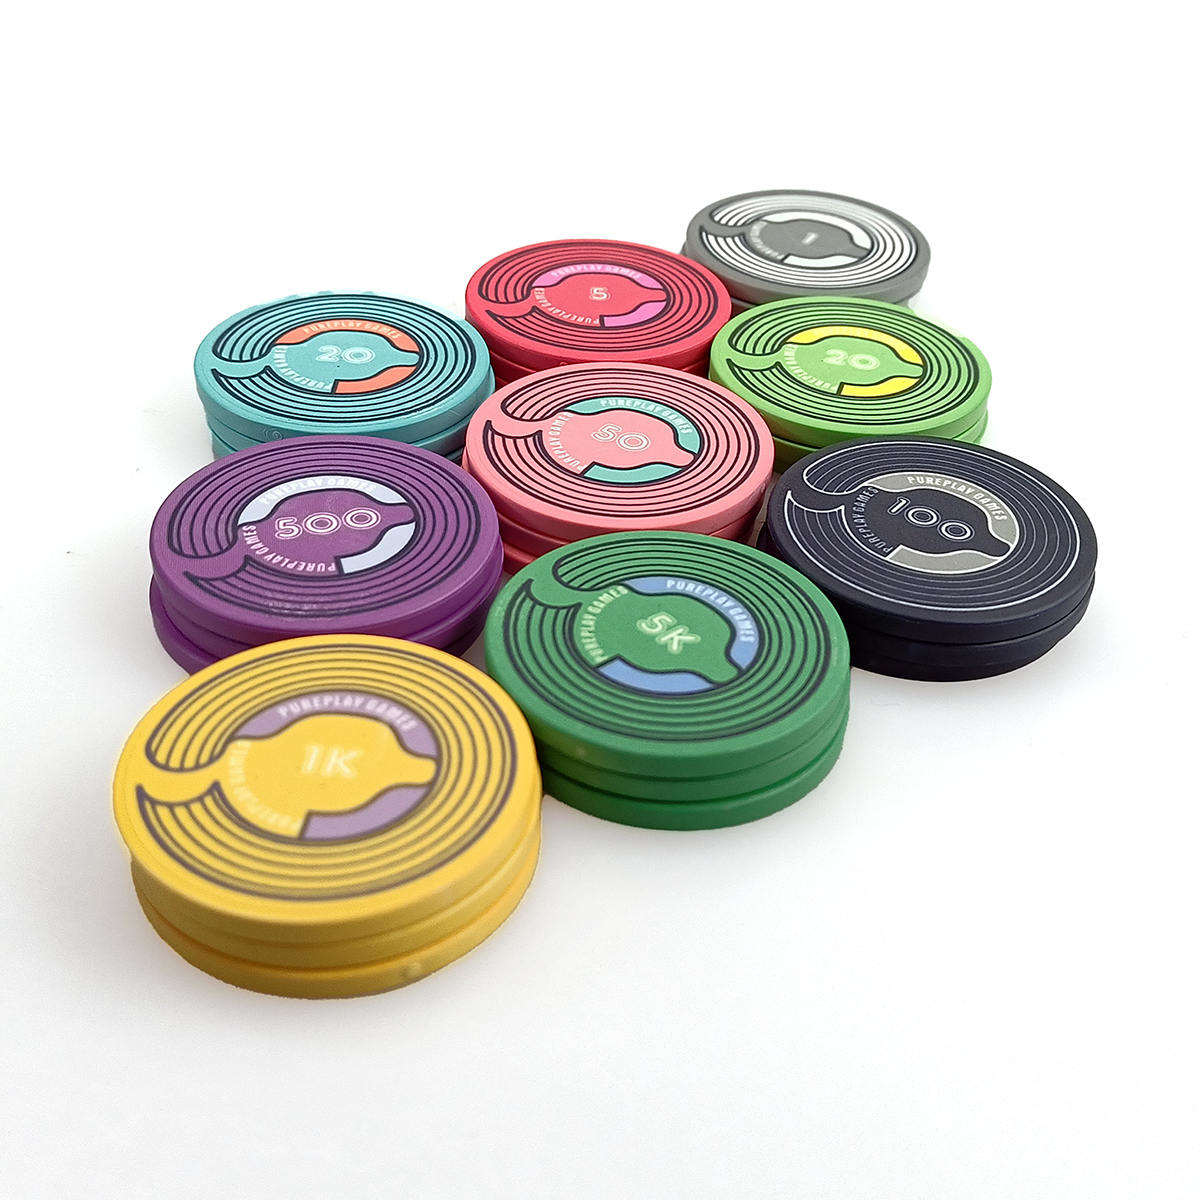 CMC060 Ready to Ship Ceramic 39mm Poker Chips 10g Custom Ept Logo Free Design Free Sample from Kaile Poker Chips Factory for Table Game